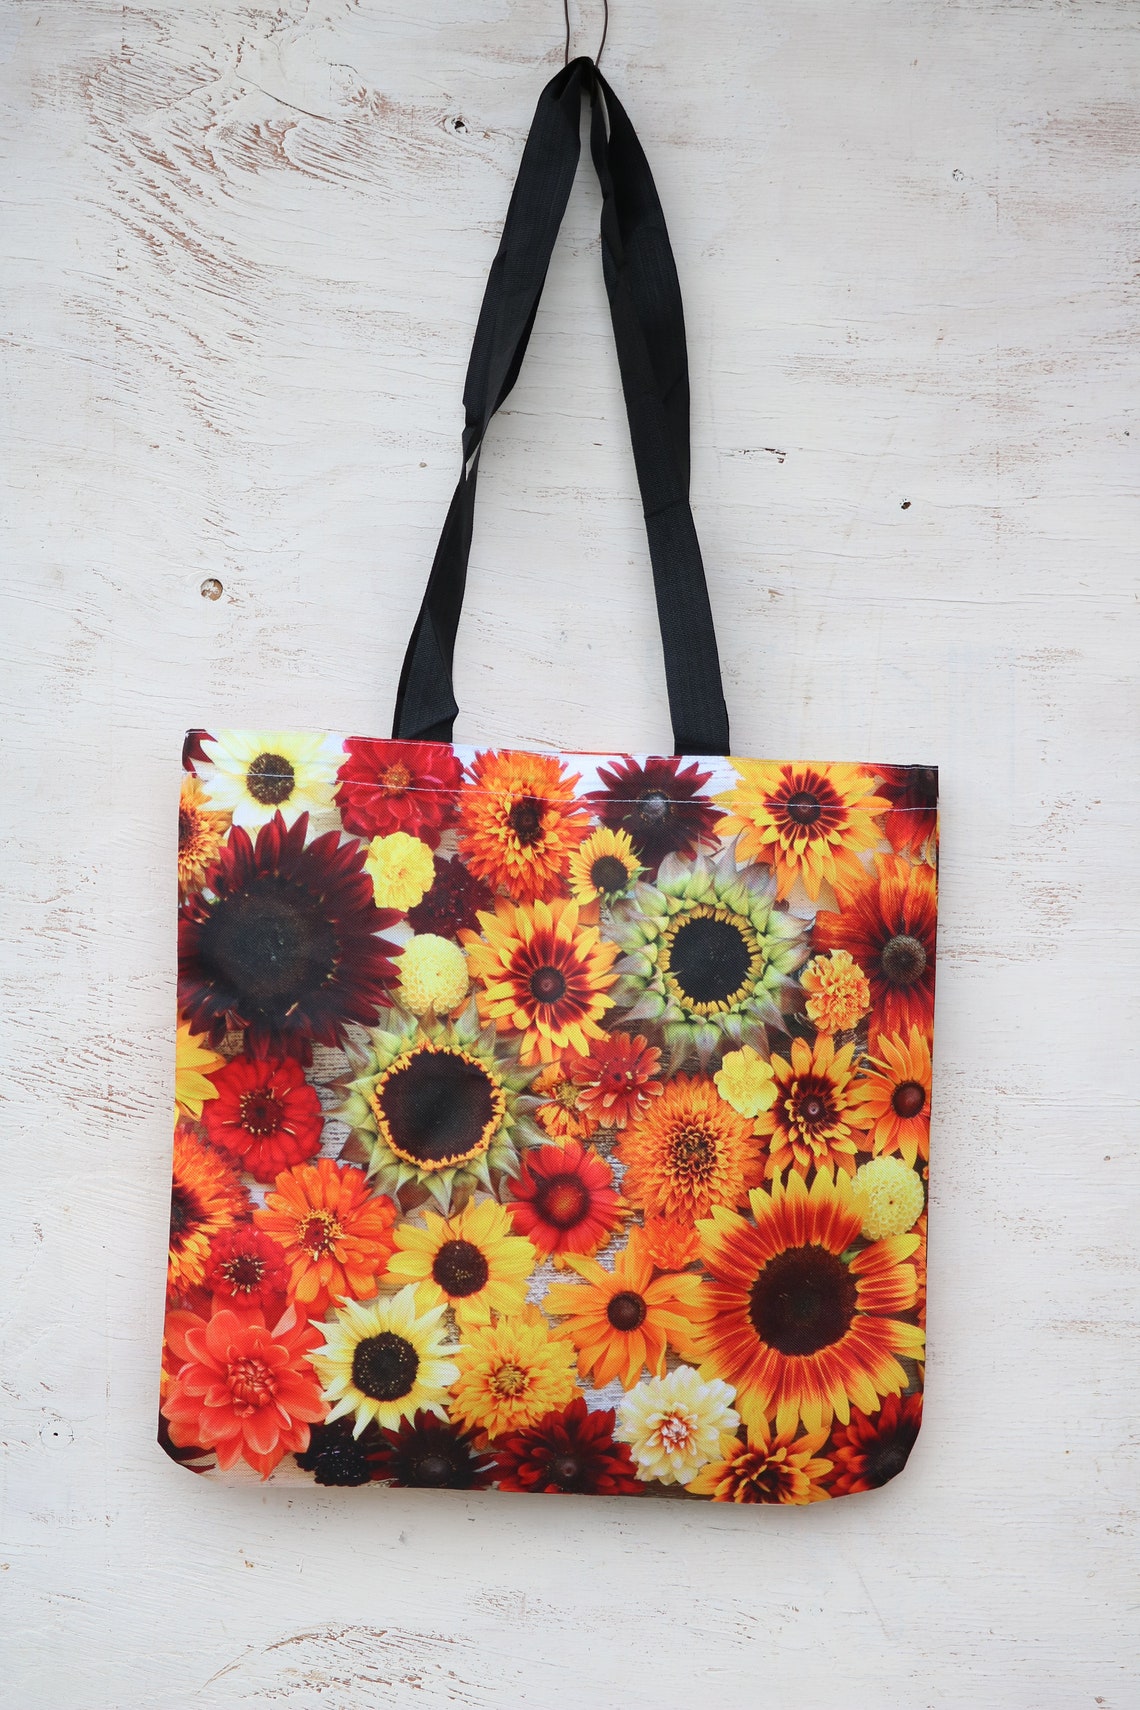 Sunflower Shopping Tote Bag Washable Grocery Bag Reusable - Etsy